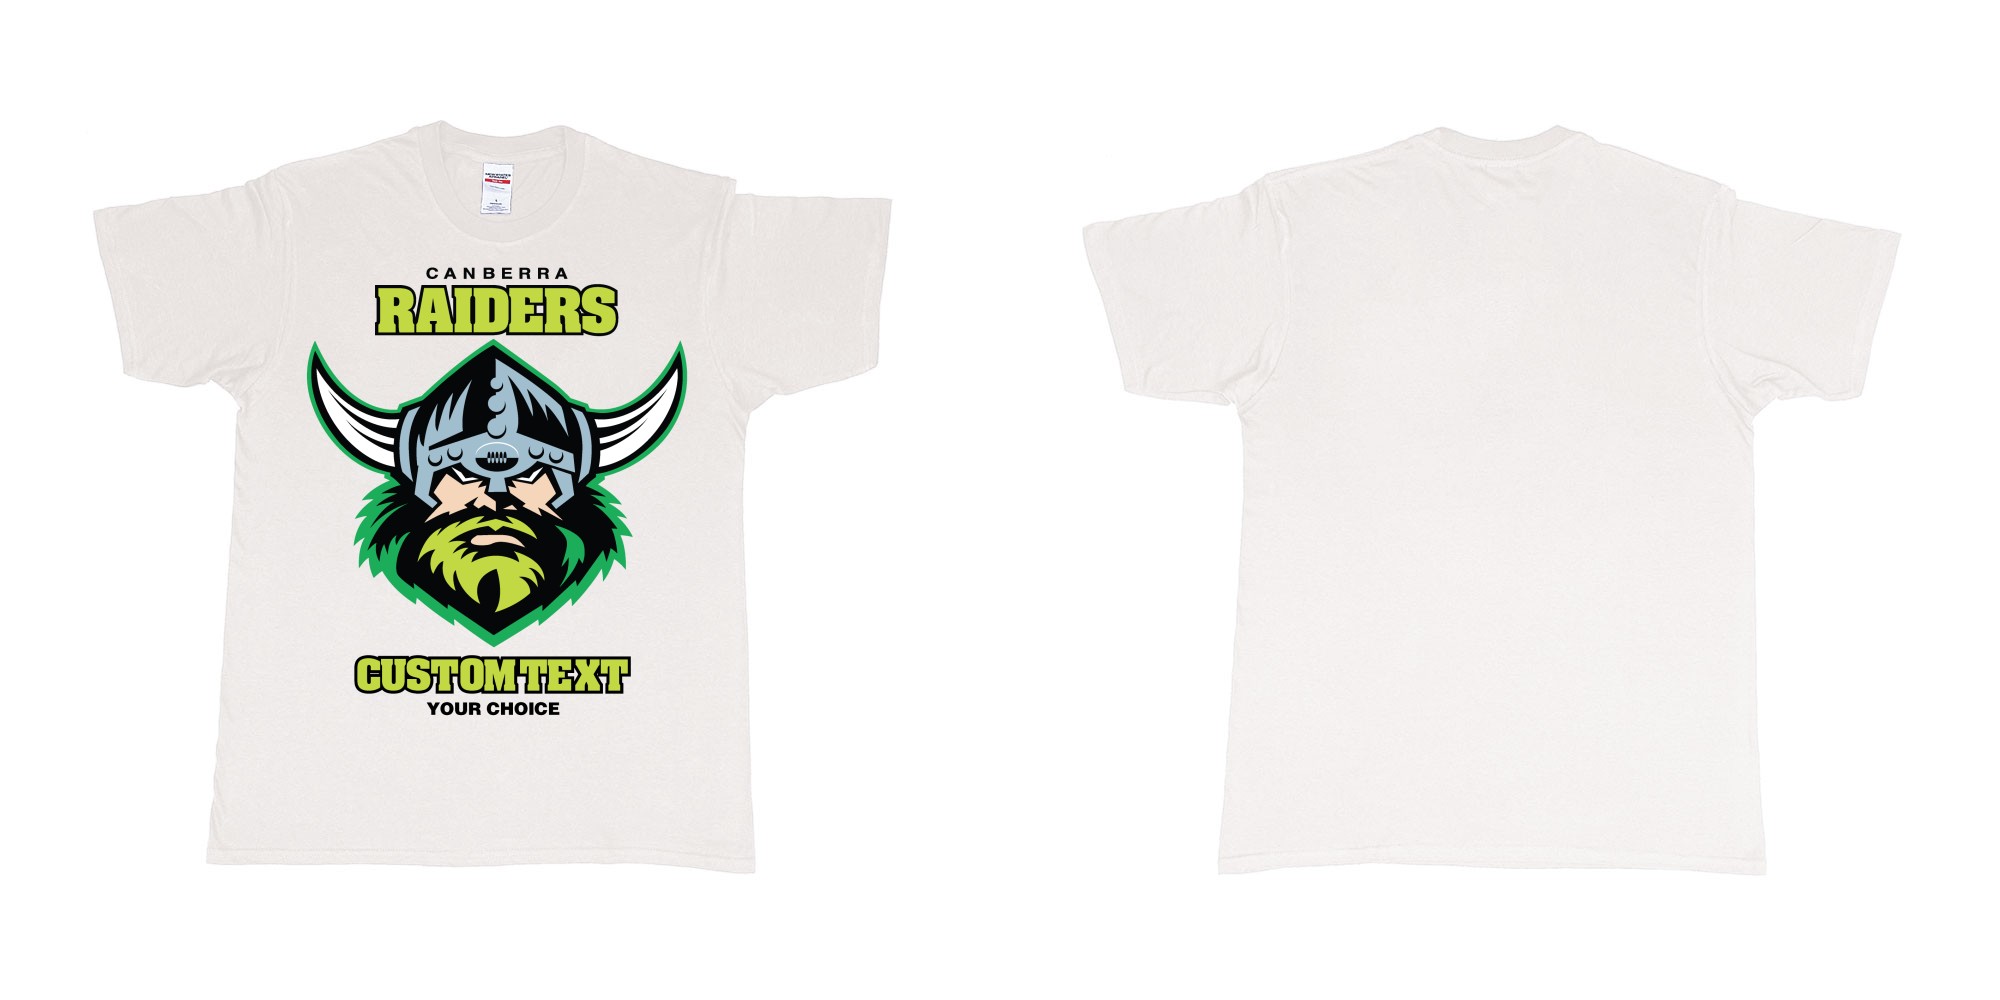 Custom tshirt design canberra raiders nrl logo own printed text near you in fabric color white choice your own text made in Bali by The Pirate Way